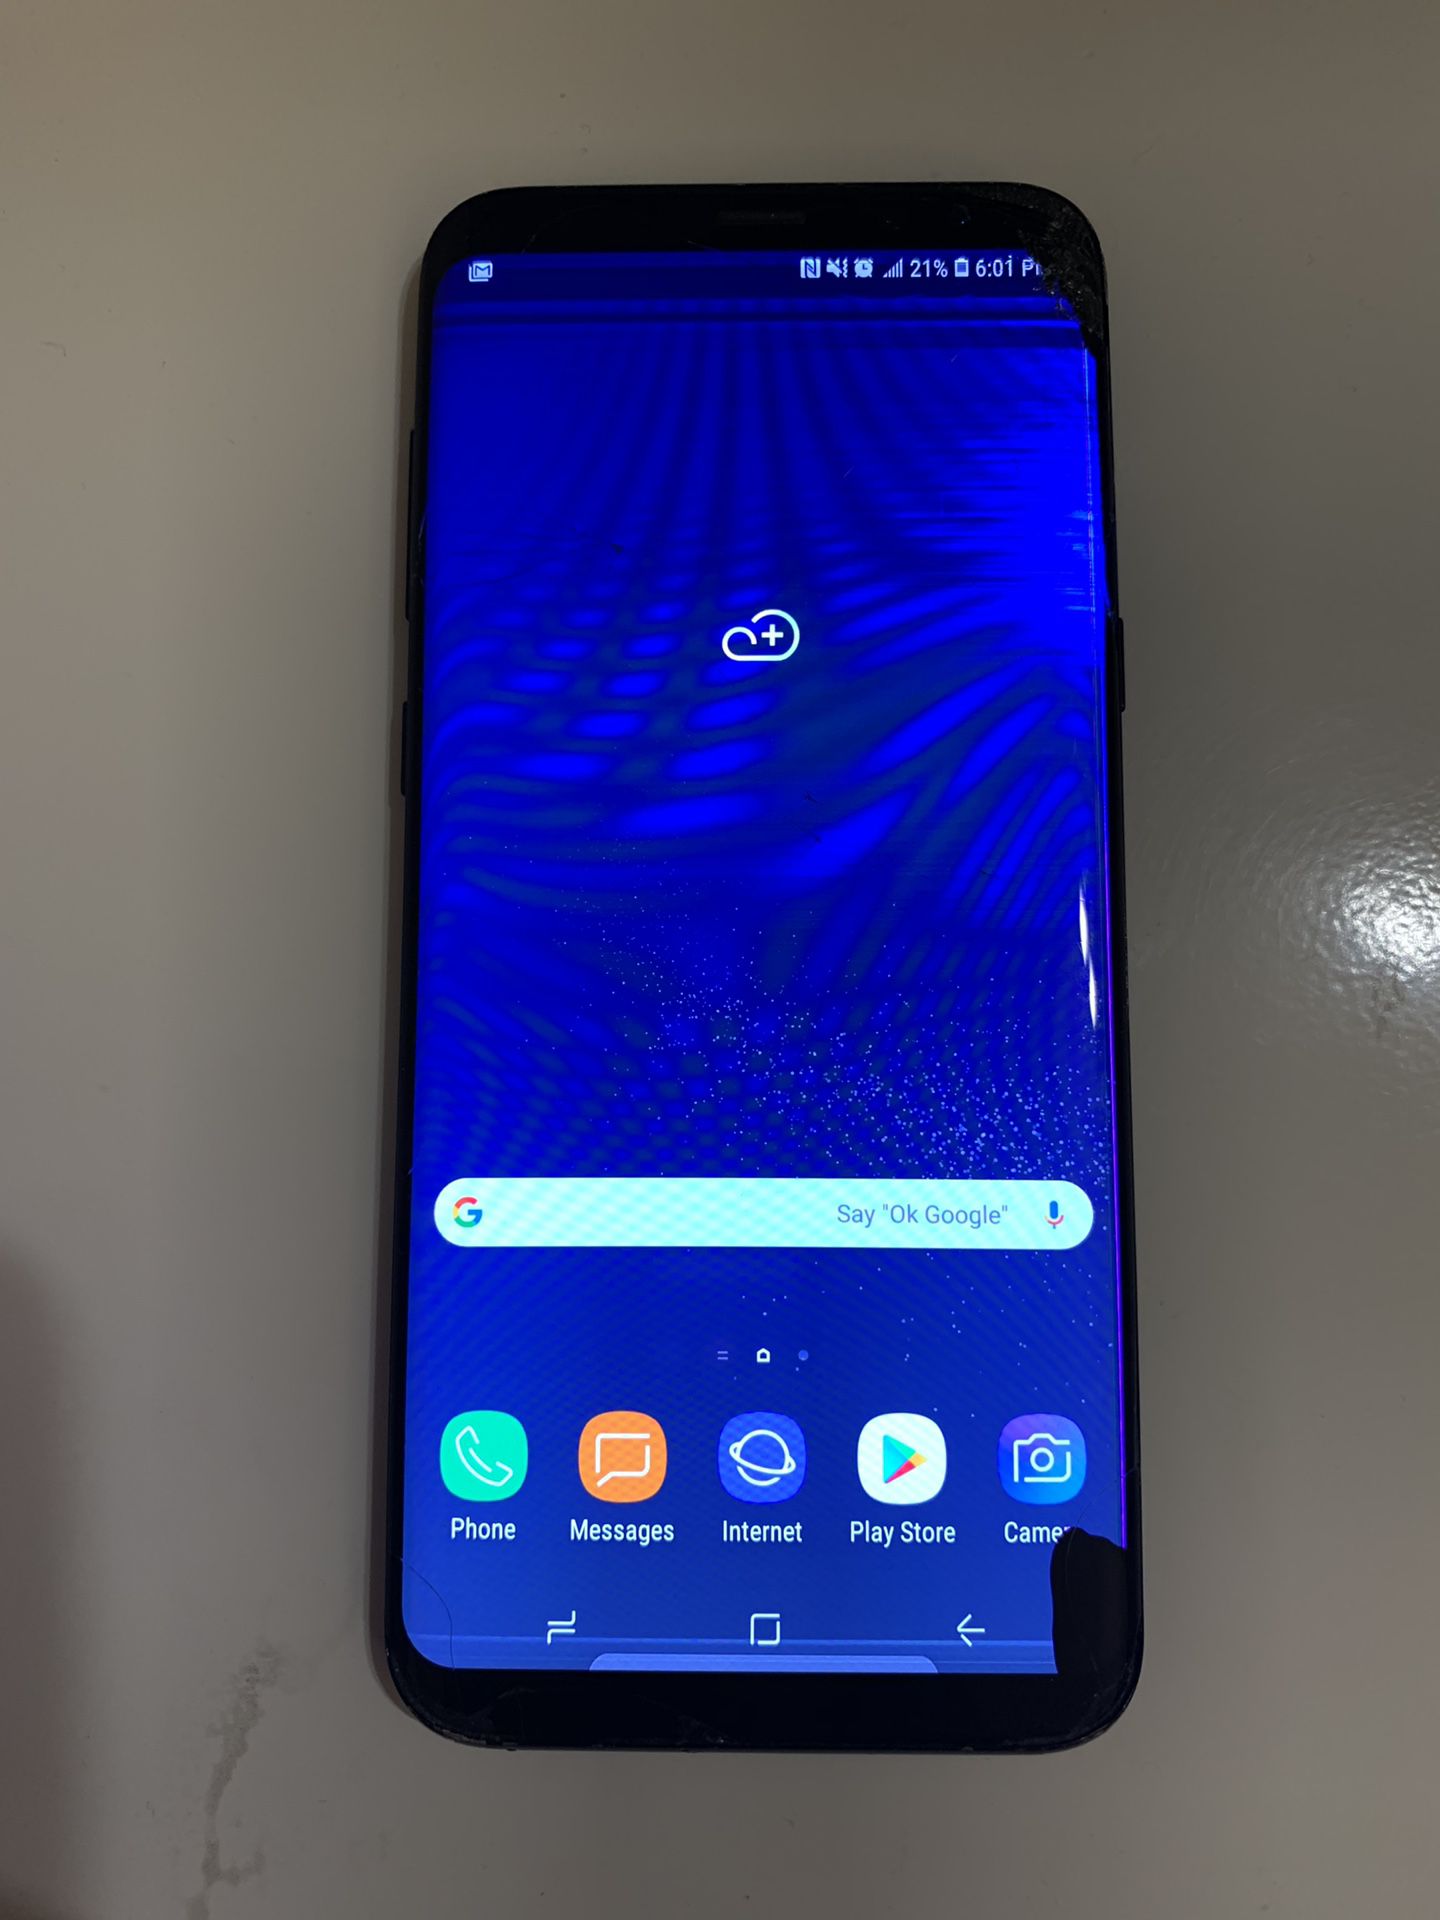 USED/GOOD CONDITION Samsung Galaxy S8+ PLUS 64GB 4G LTE (FACTORY UNLOCKED) AT&T T-MOBILE METROPCS +Charger price Firm